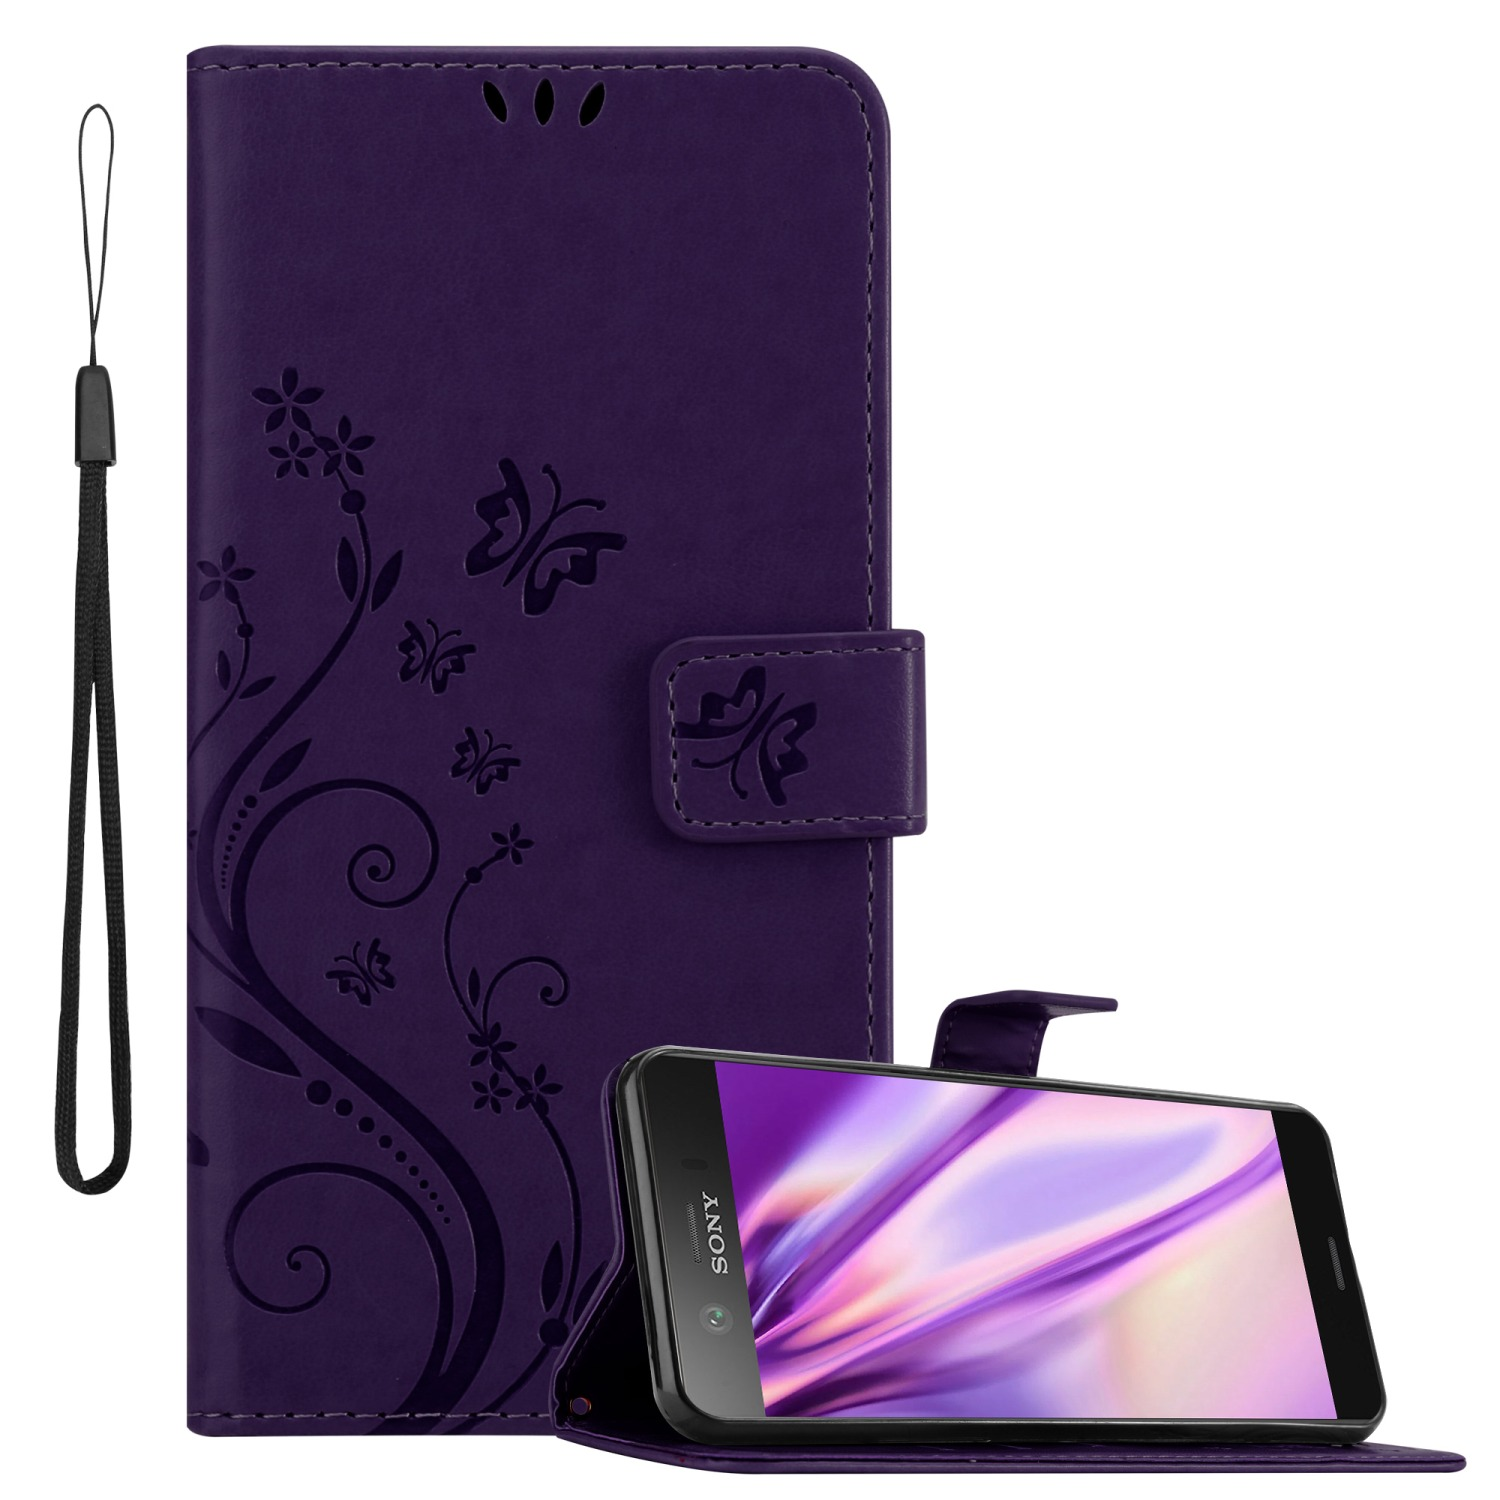 CADORABO XZ1 COMPACT, LILA DUNKEL Muster Xperia Sony, Hülle Case, Flower Blumen FLORAL Bookcover,